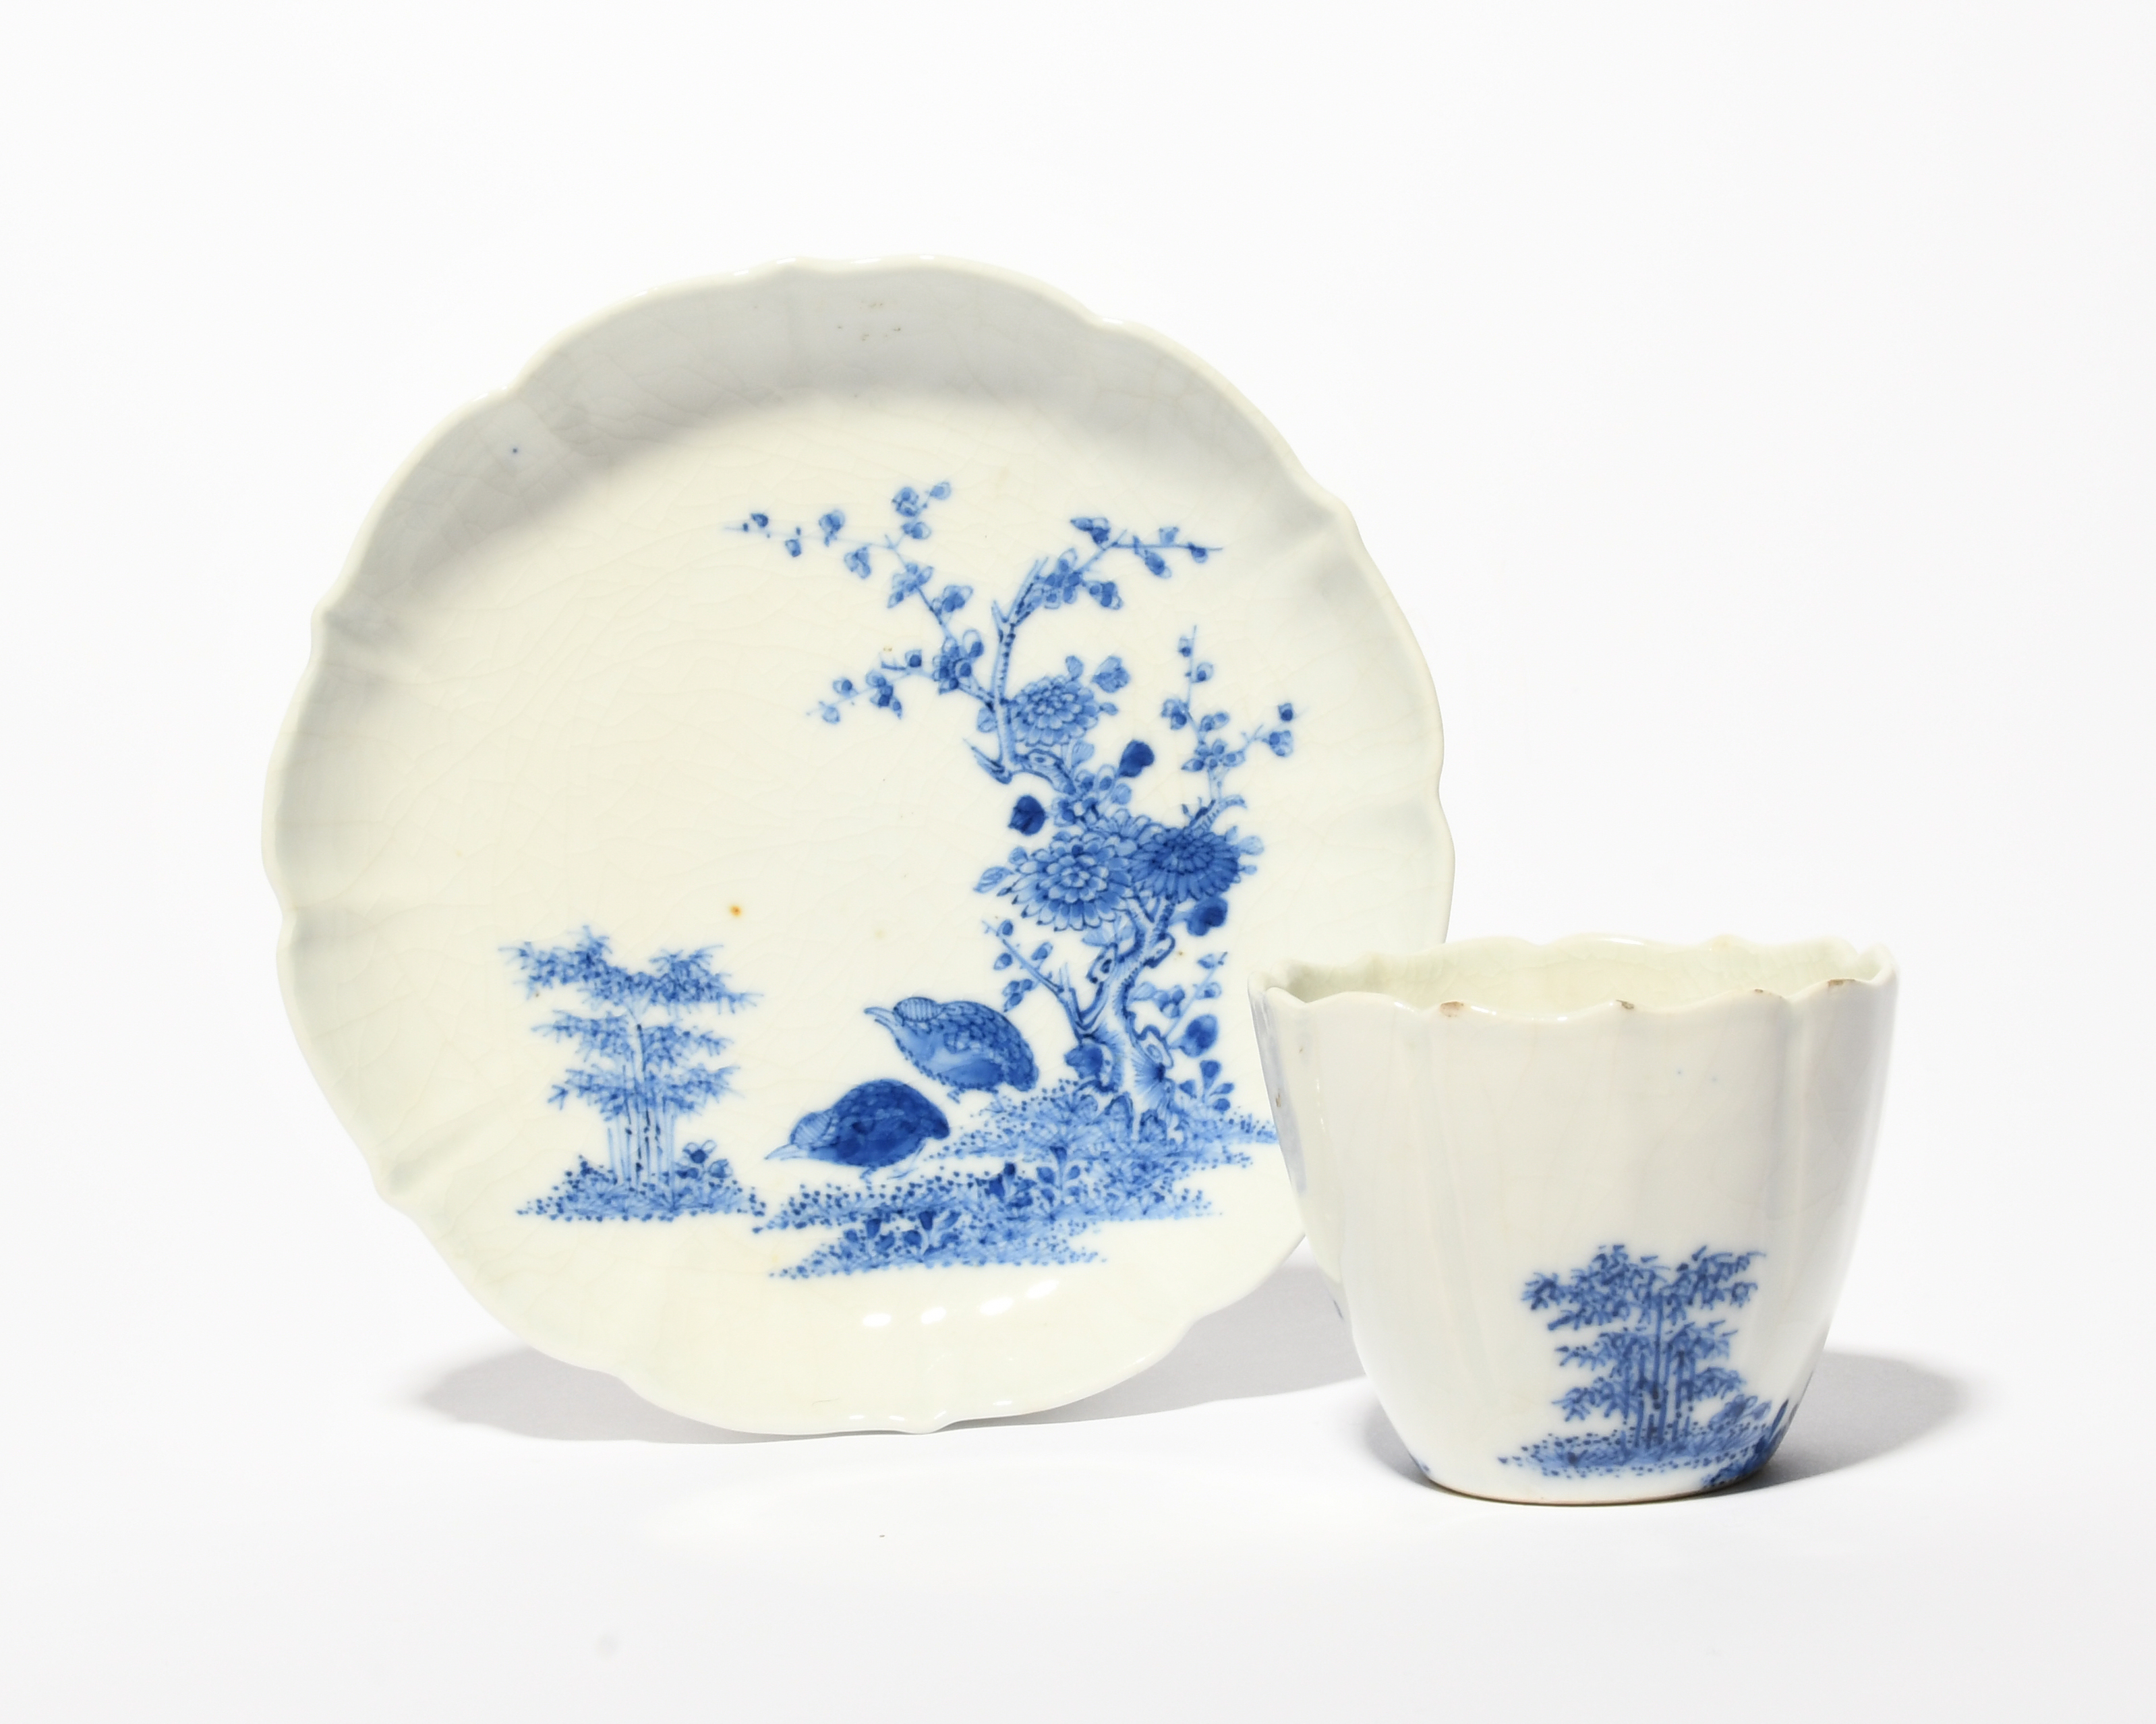 A Chinese soft-paste porcelain blue and white teabowl and saucer, mid 18th century, of lobed form, - Image 2 of 3